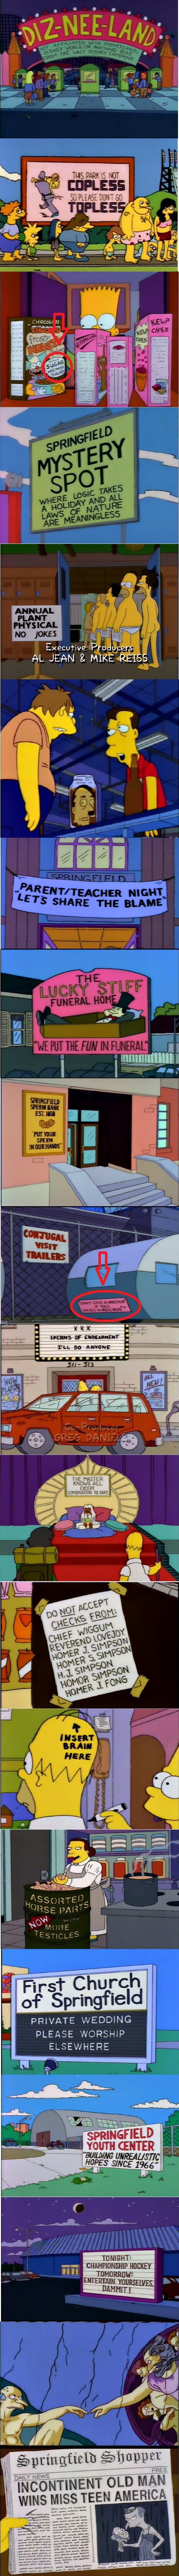 Only in The Simpsons